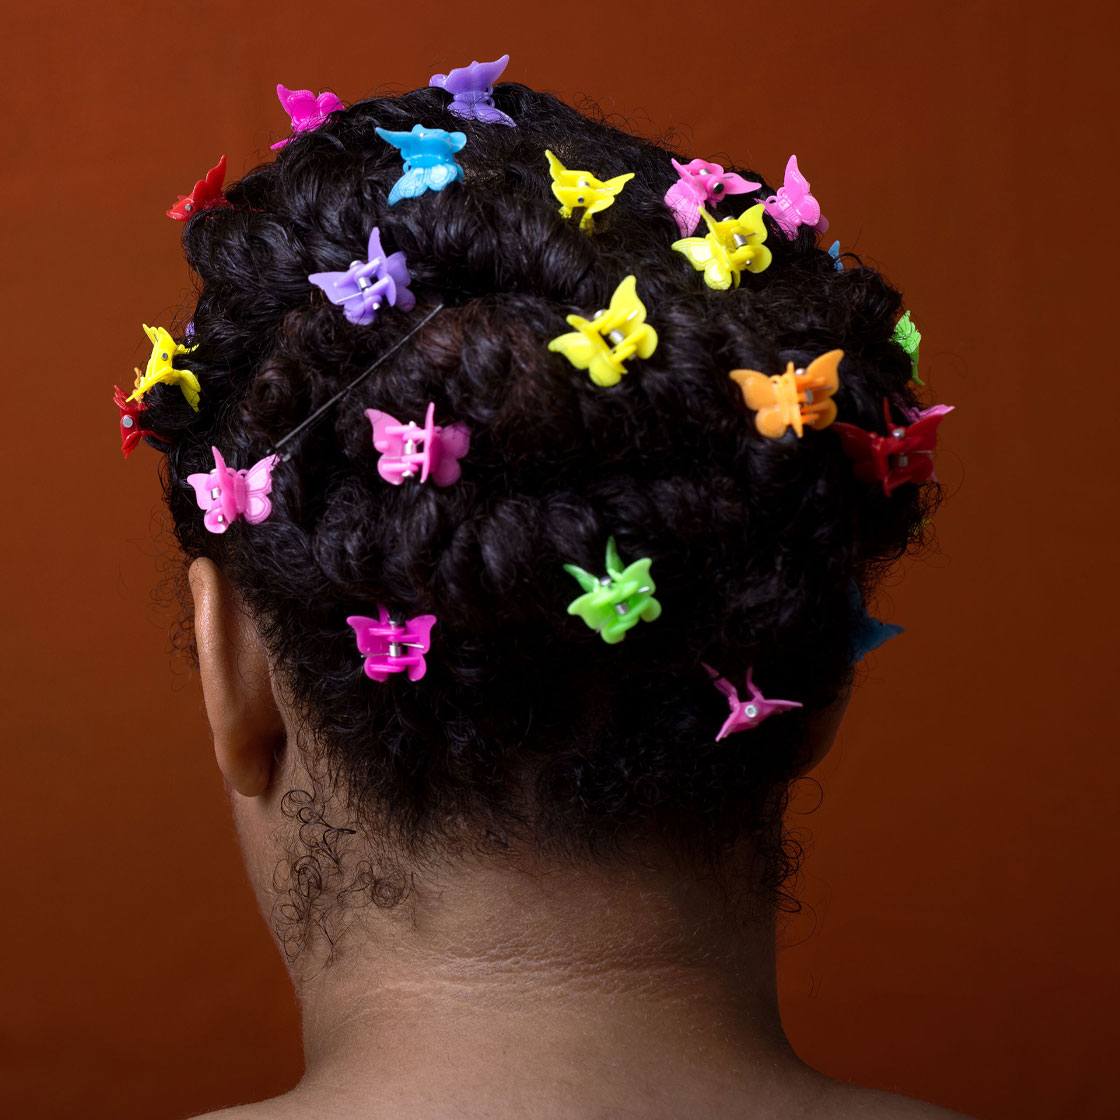 A portrait of the back of someone's head, their hair filled up with different colored butterfly clips.